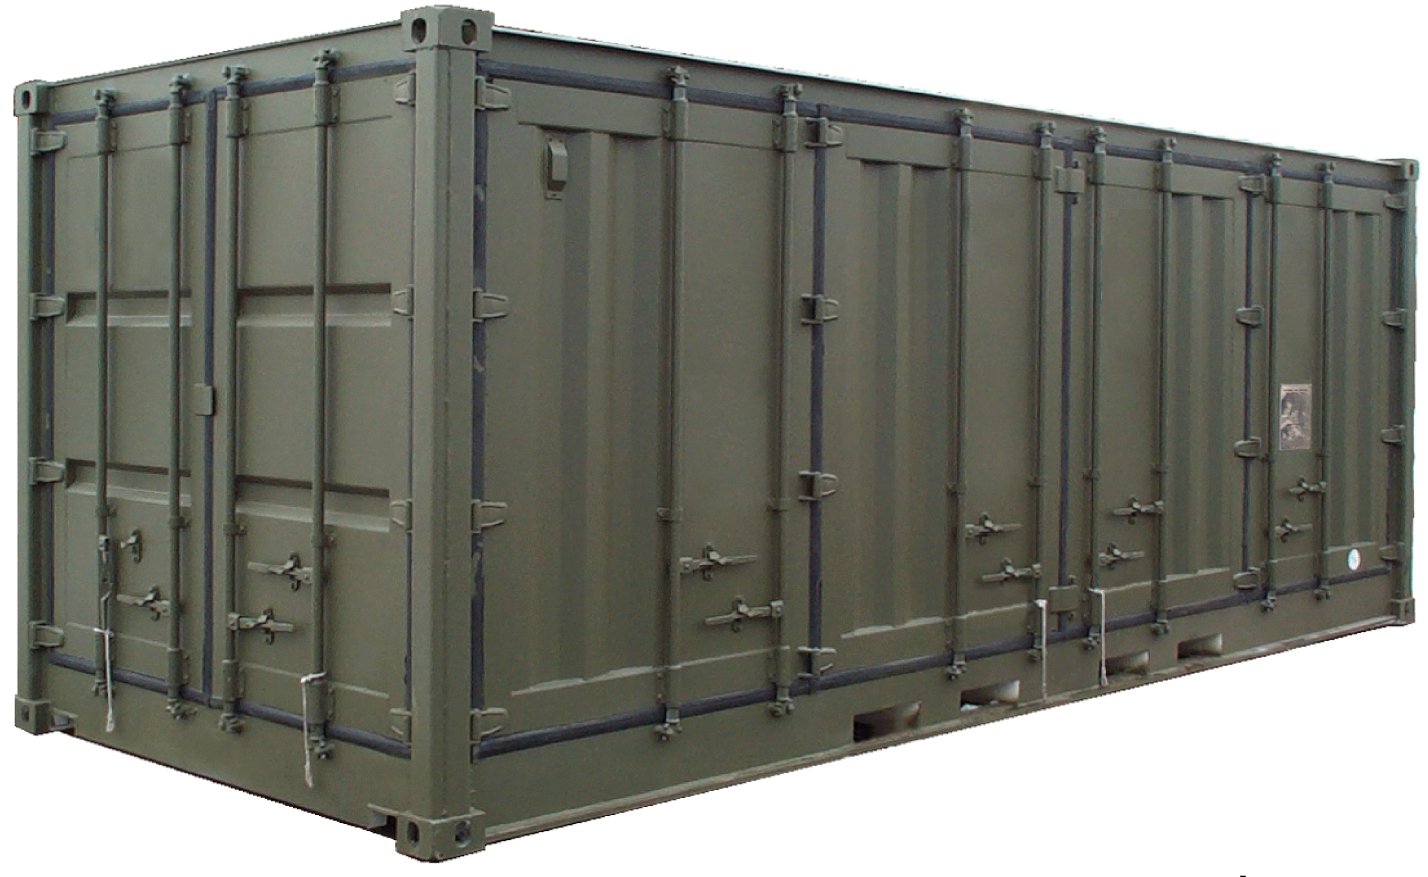 20’ x 8’ Dry Freight ISO Container - One Full Side Opening and Double Doors One End